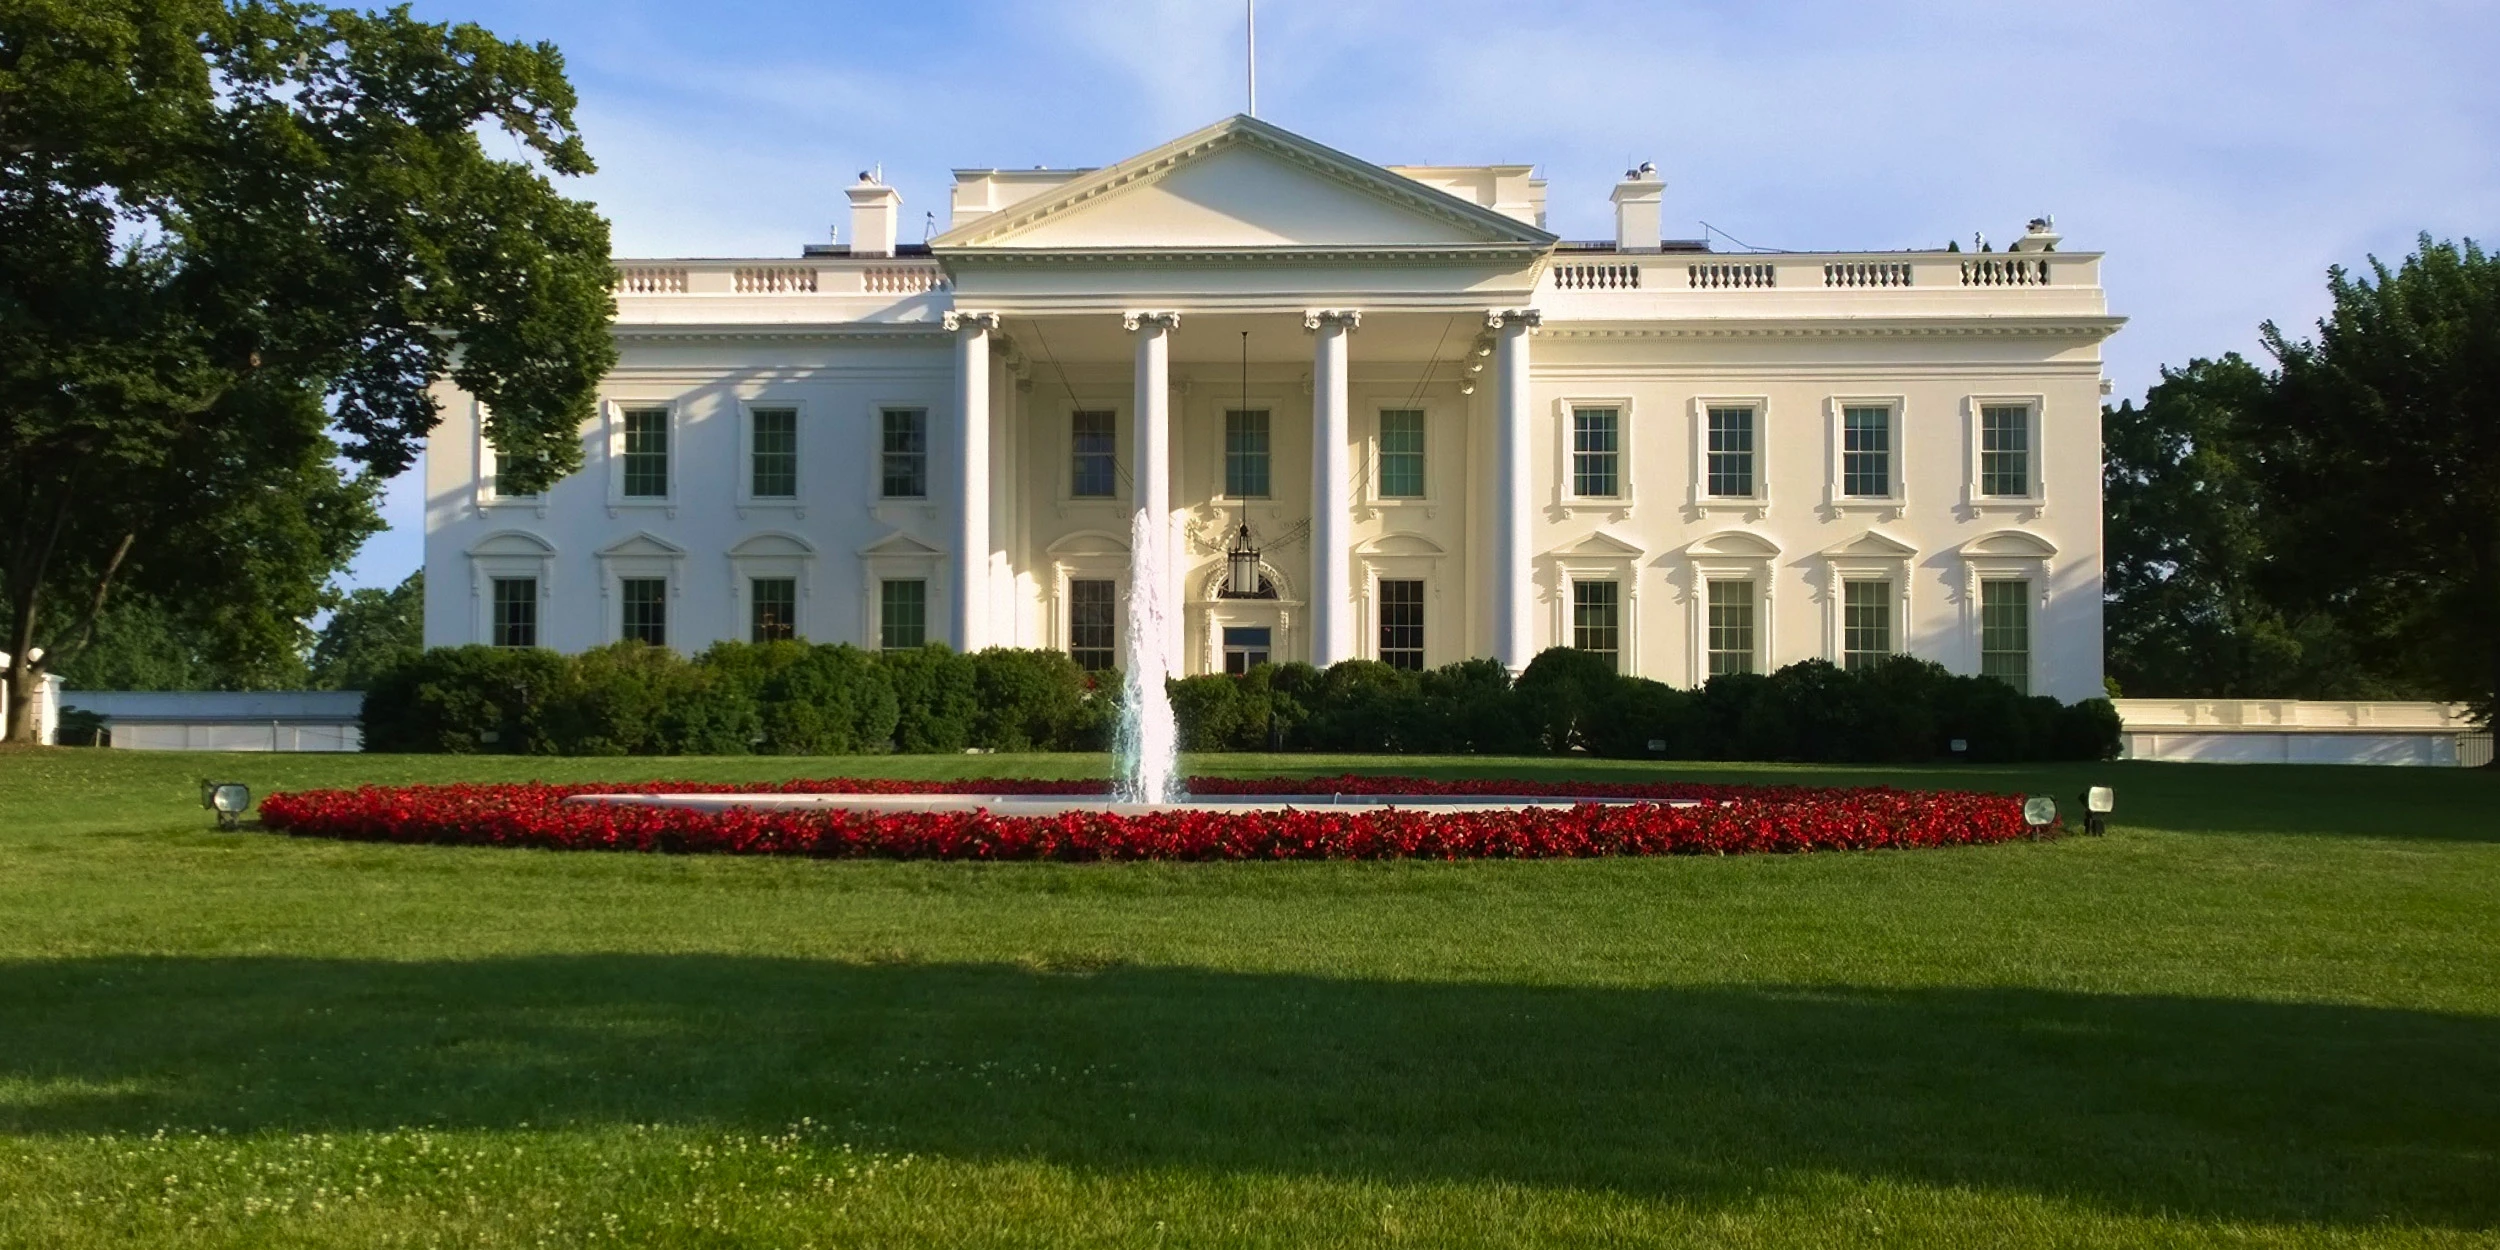 The White House Is Seeking Public Consultation On Cryptocurrency's Energy Use And Environmental Impact.